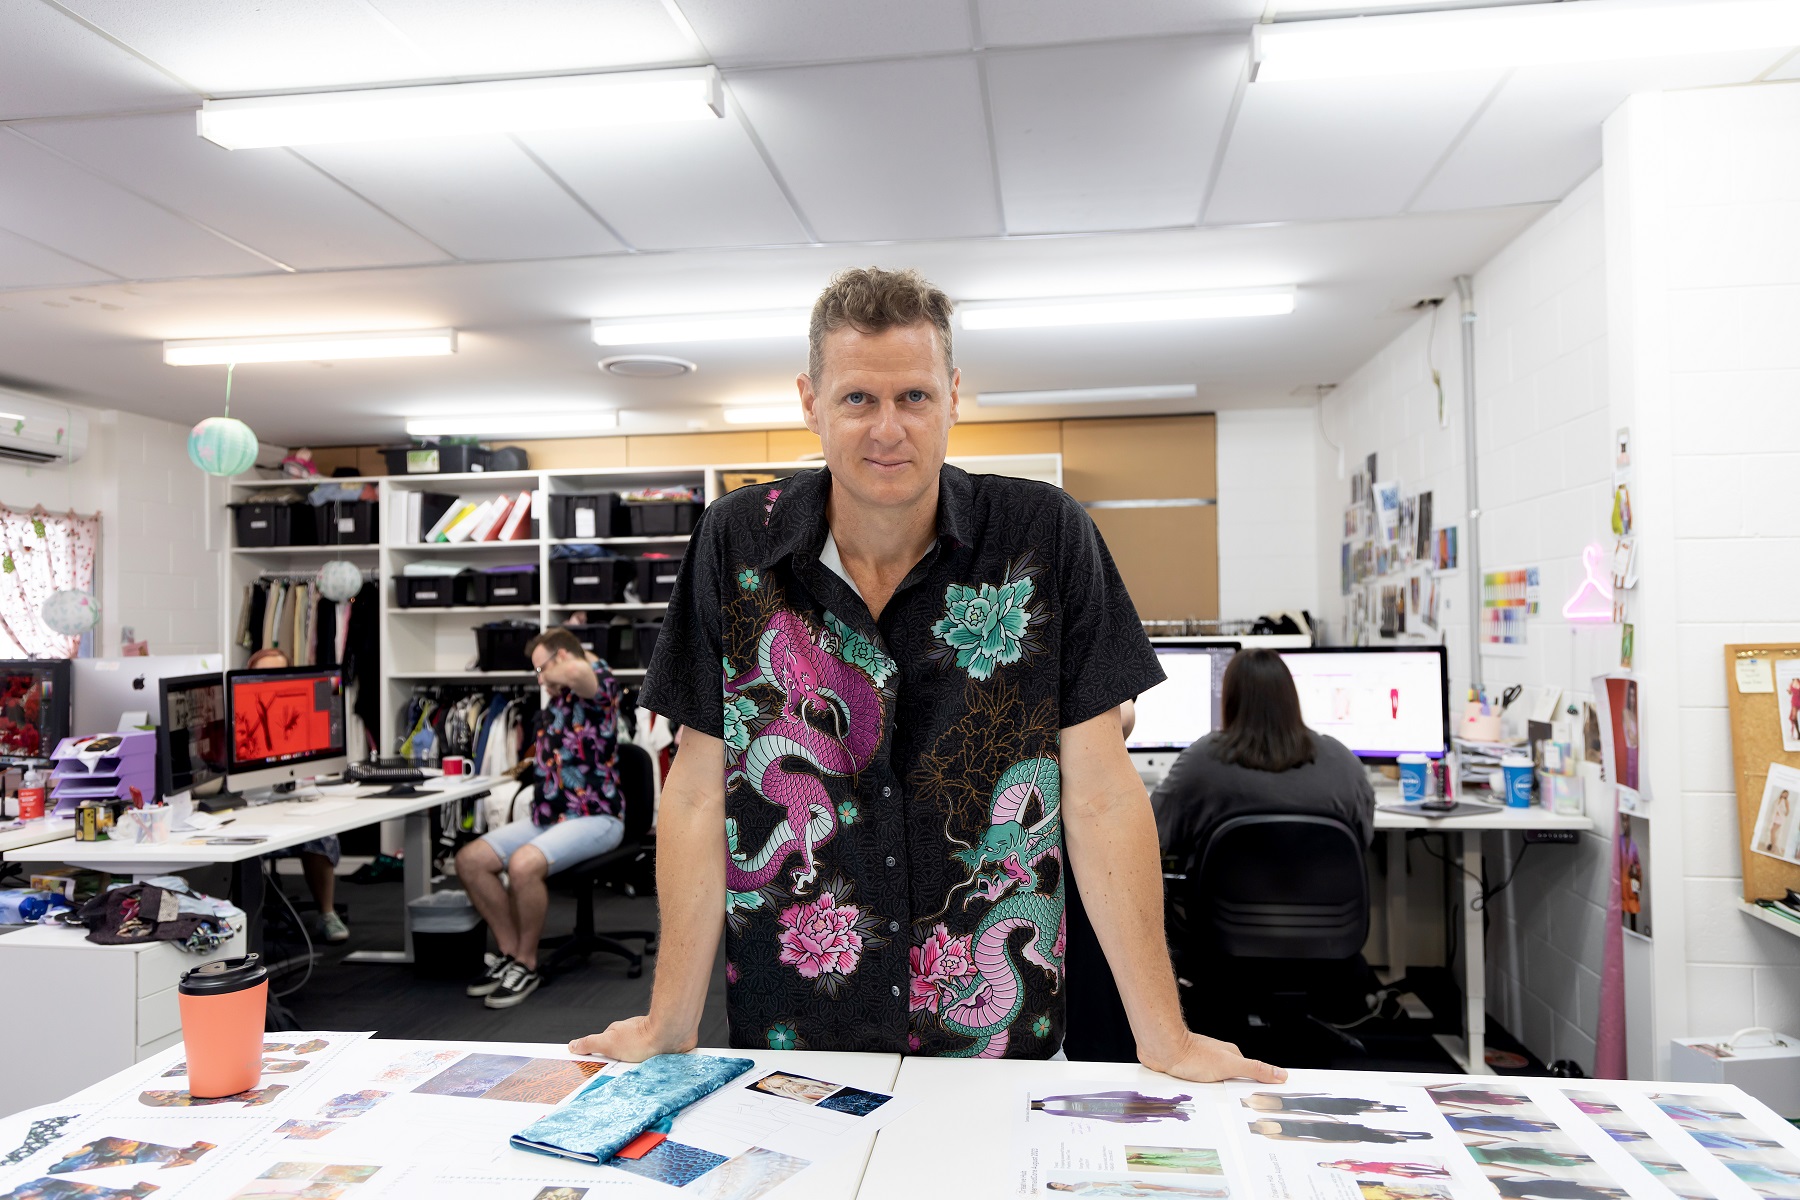 https://www.retailbiz.com.au/wp-content/uploads/2023/04/WEB-ONLY-How-BlackMilk-Clothing-creates-success-in-the-licensed-fashion-space_founder-James-Lillis.jpg